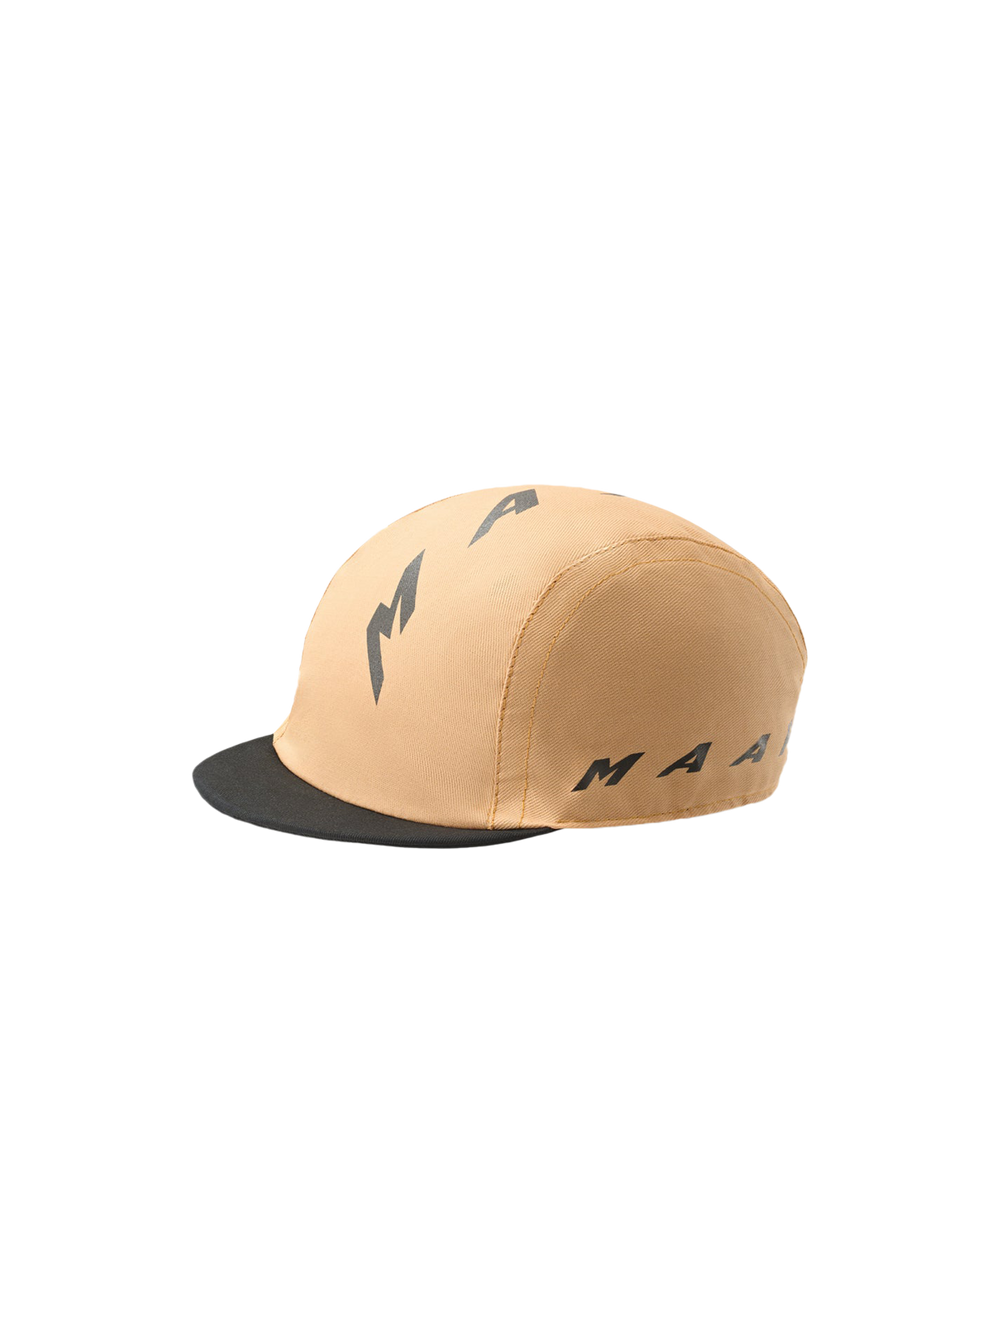 Product Image for Evade Cap